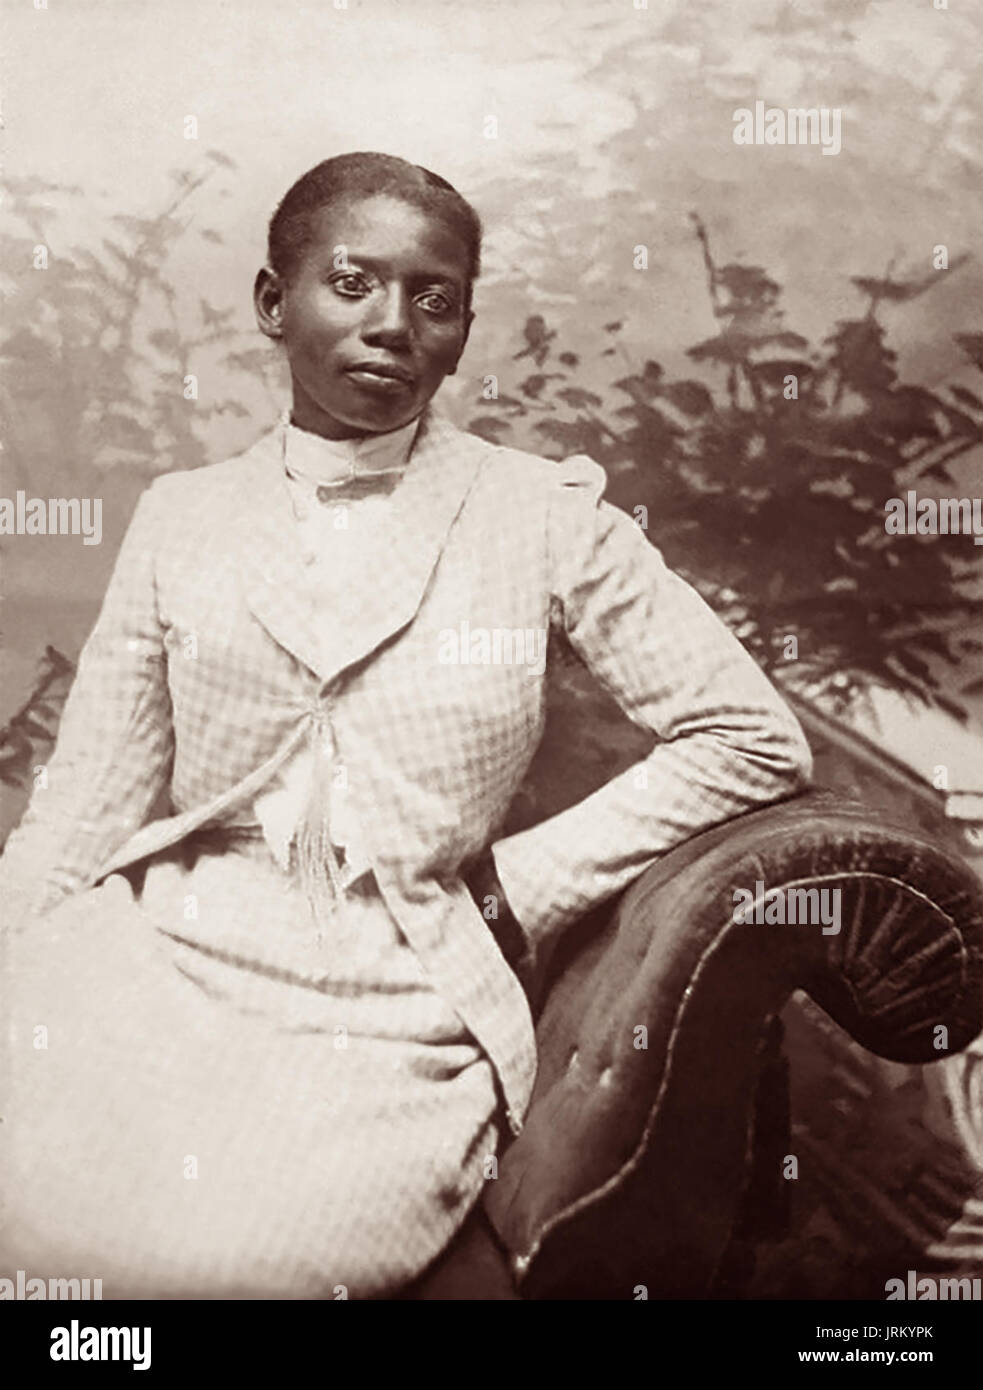 Nancy Jones was the first black, single, female missionary to Africa comissioned by the American Board of Commissioners for Foreign Missions (ABCFM) in the United States. Jones served in Mozambique from 1888 to 1893 and later in Southern Rhodesia (Zimbabwe) from 1893 to 1897. (Photo from Natal, Africa c1888) Stock Photo